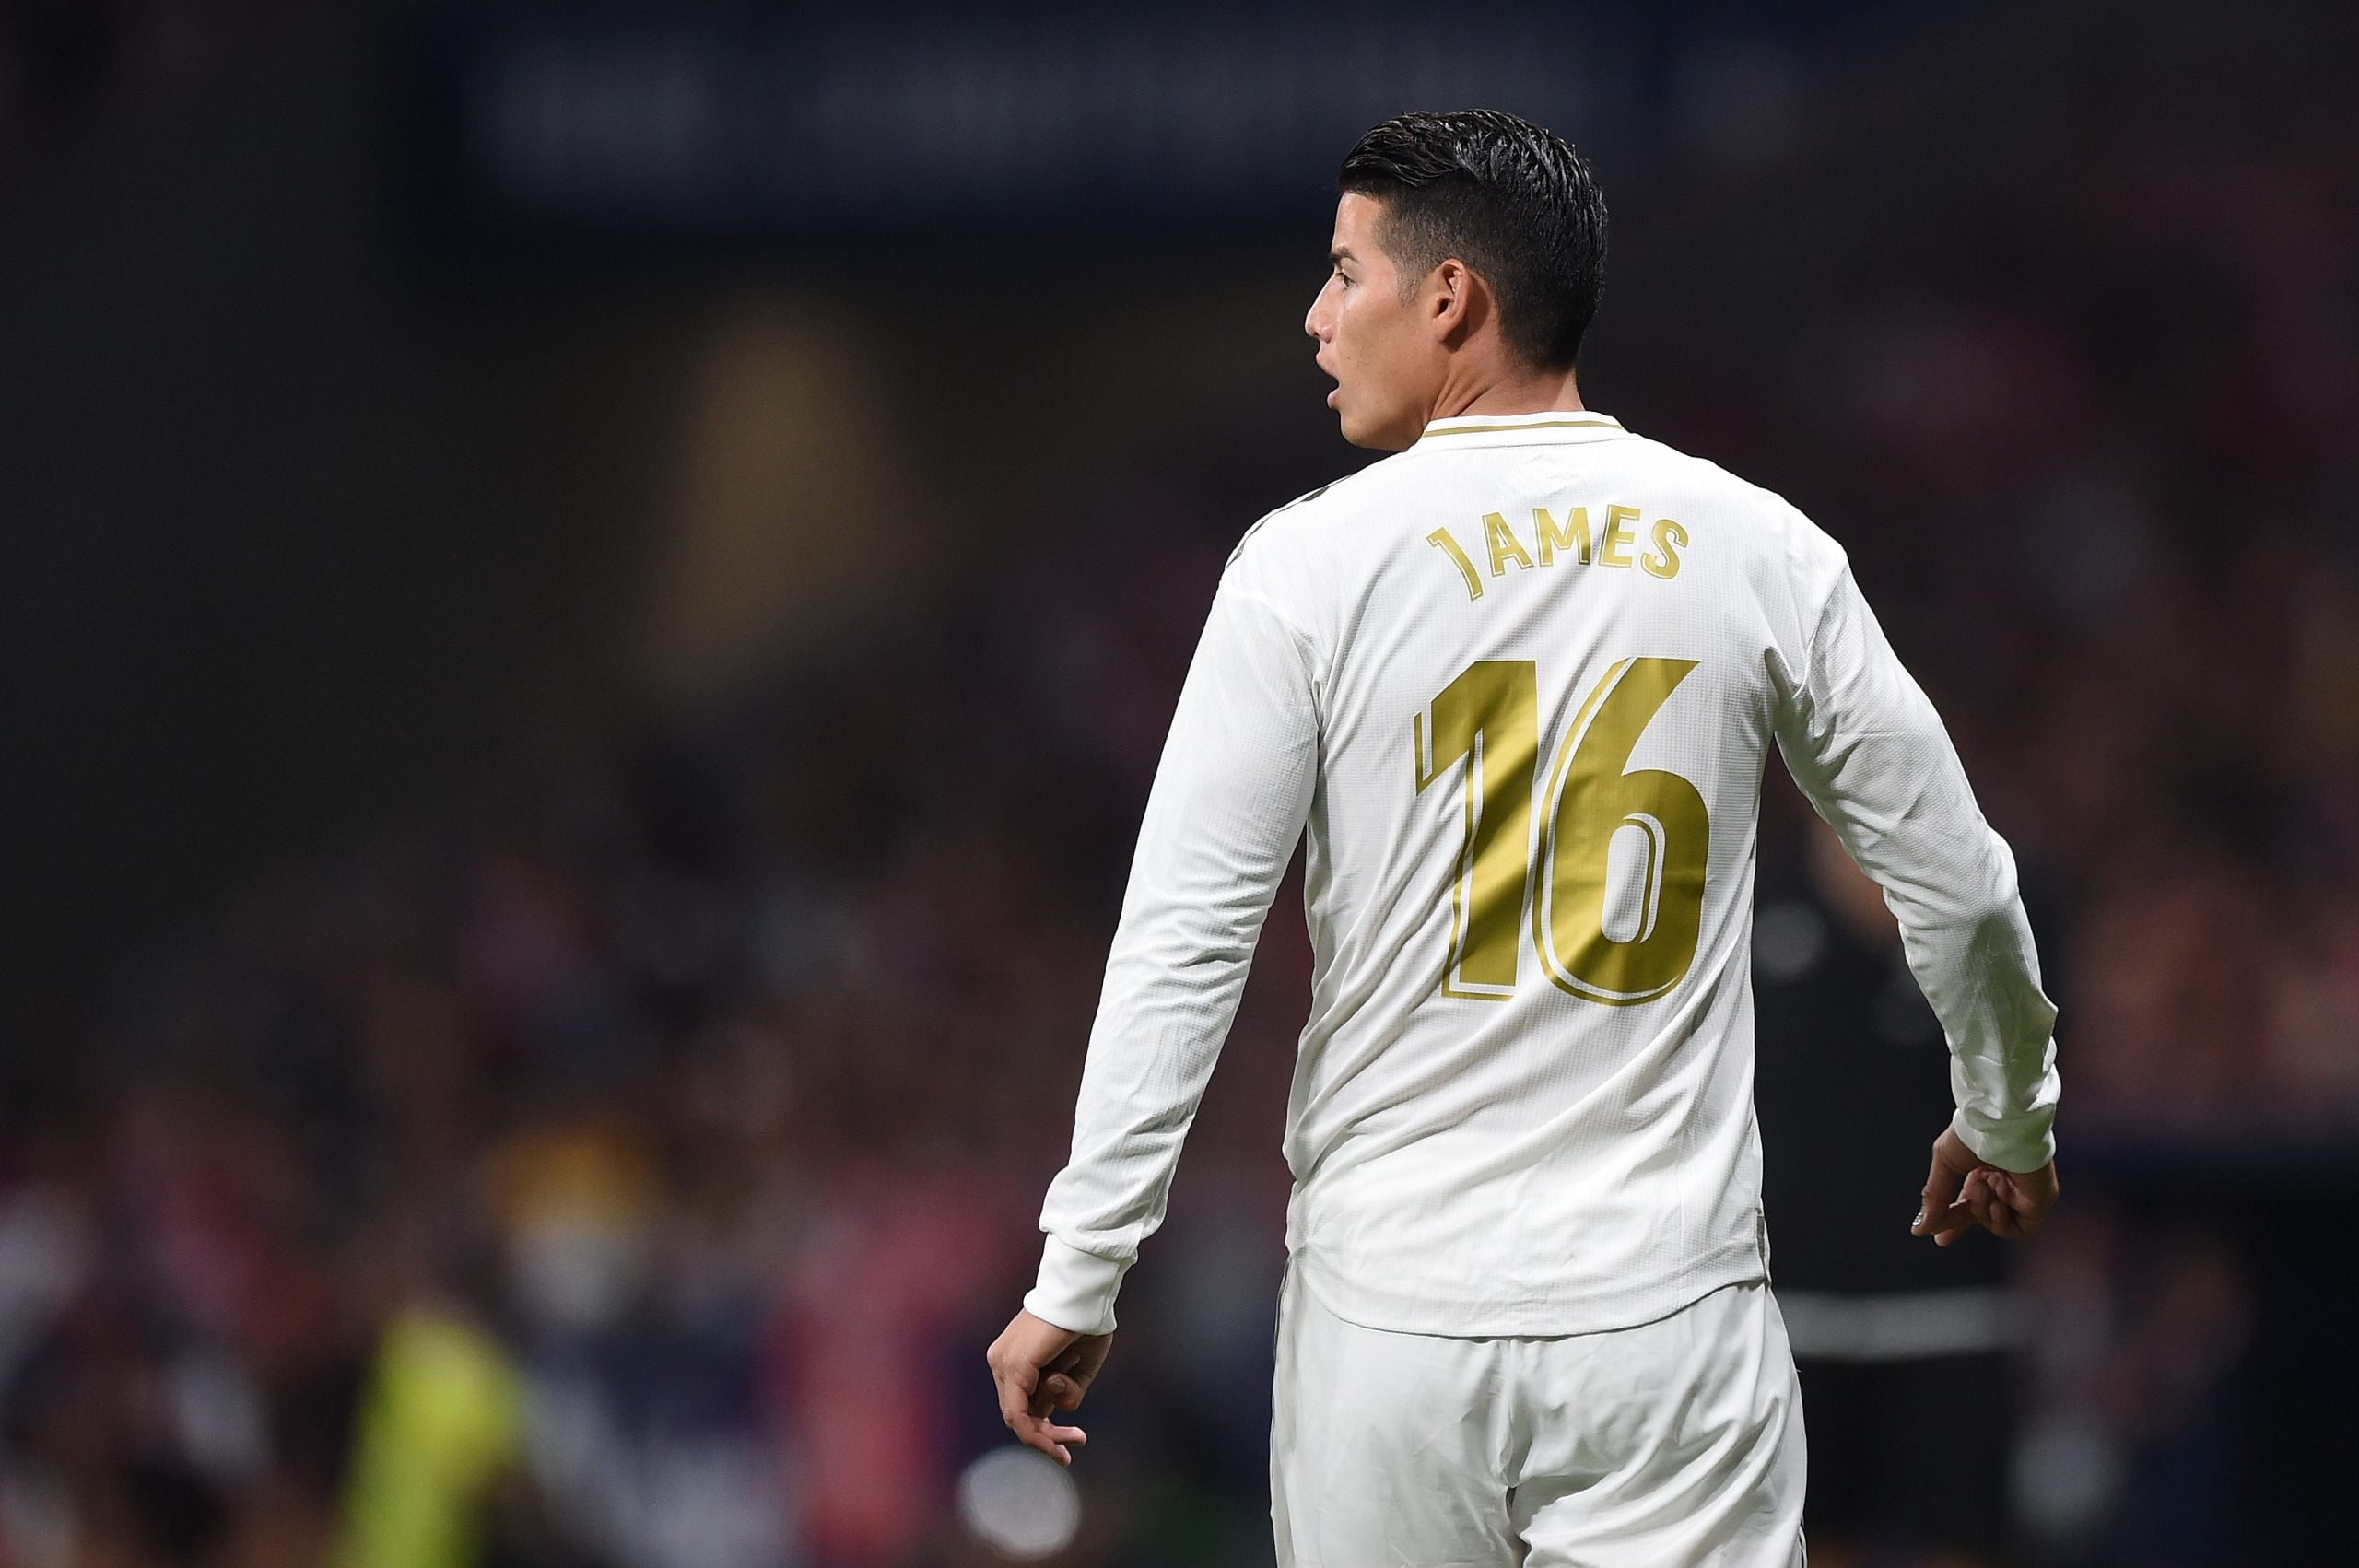 James Rodriguez of Real Madrid CF looks on during the Liga match between Club Atletico de Madrid and Real Madrid CF at Wanda Metropolitano on September 28, 2019 in Madrid, Spain. (Photo by Denis Doyle/Getty Images)